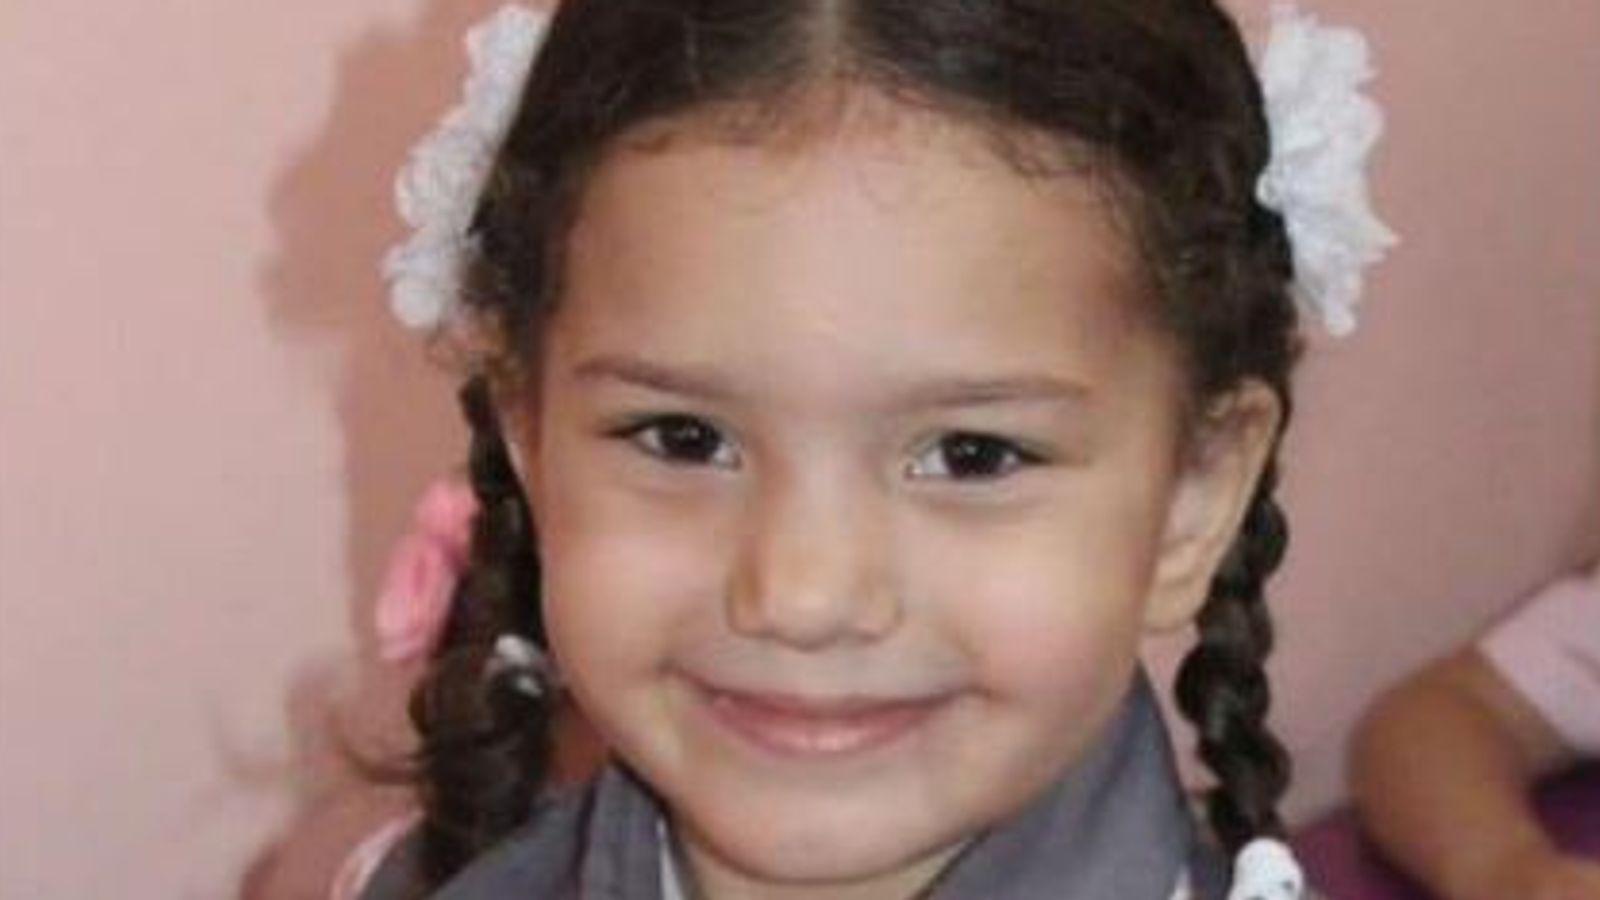 Girl, 6, recorded pleading with Gaza rescuers to save her after attack found dead